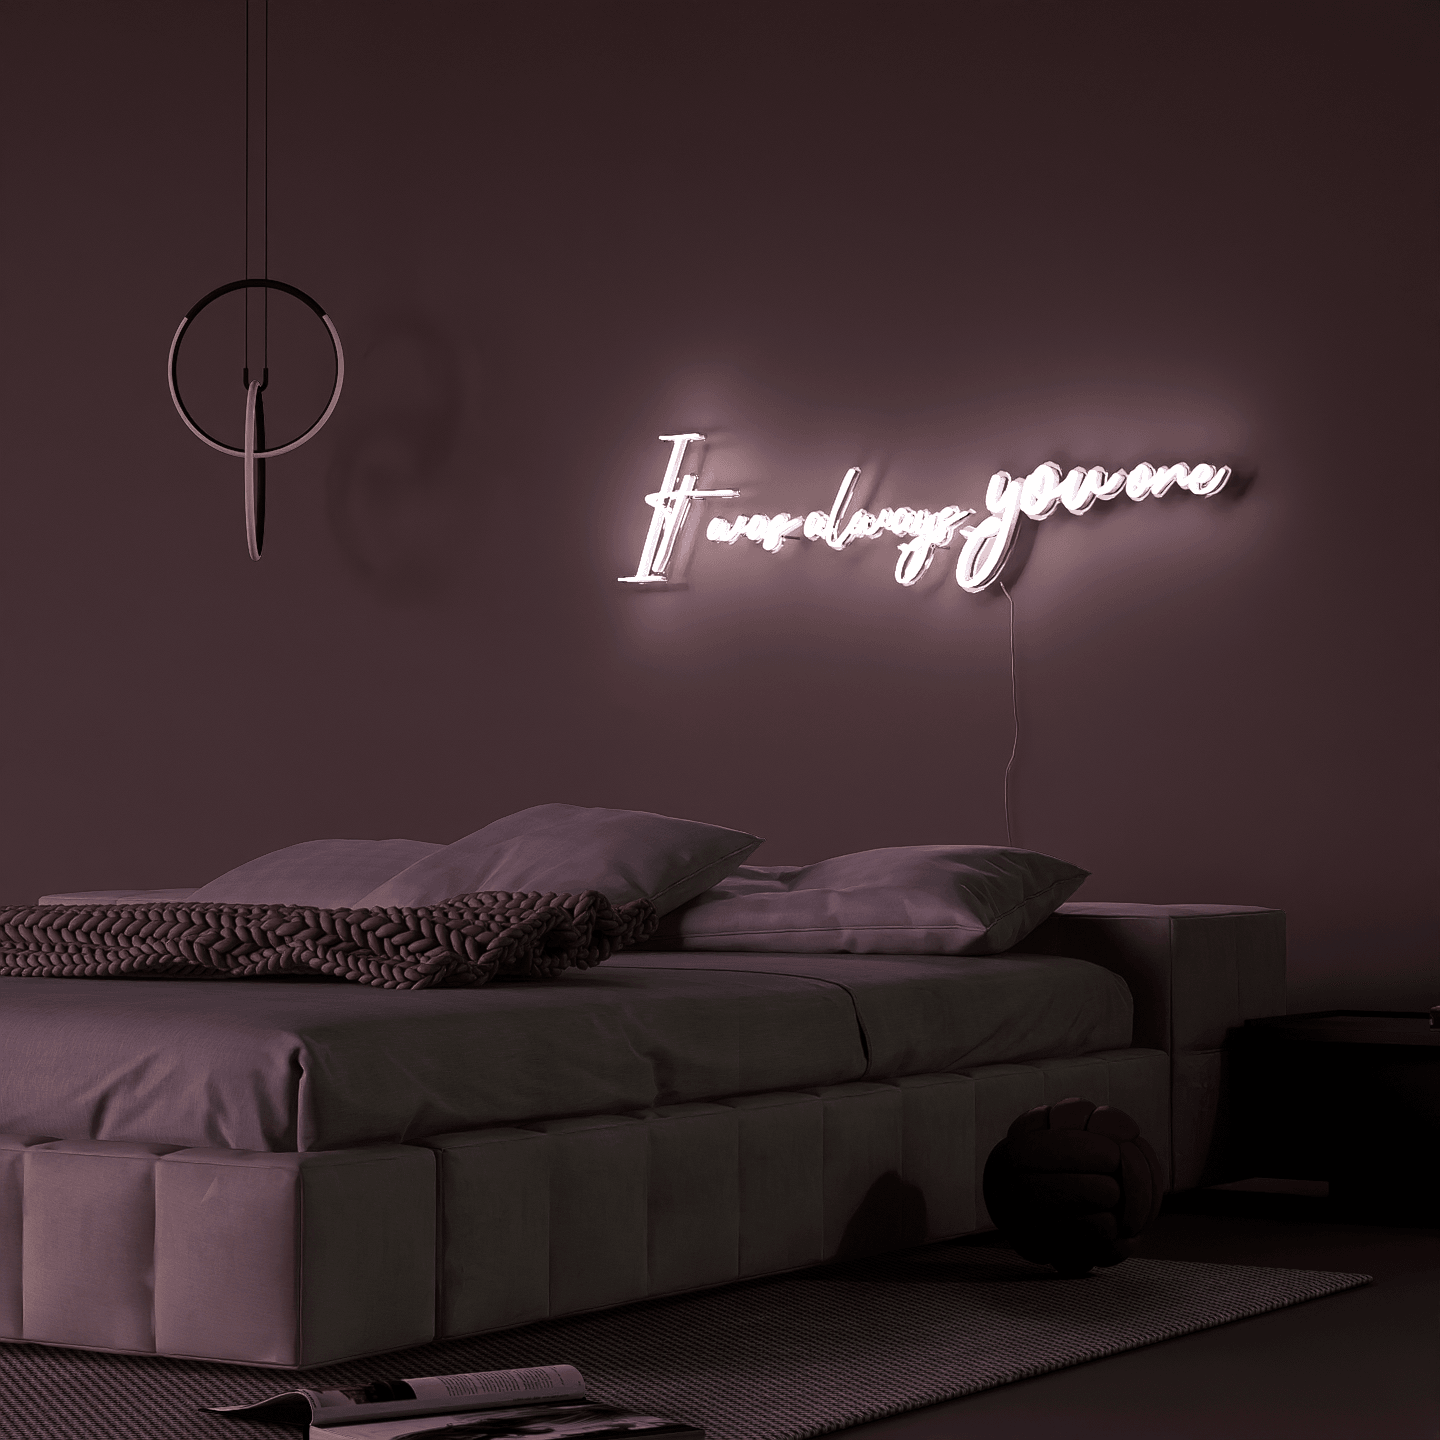 side-shot-of-lit-white-neon-lights-hanging-on-wall-for-display-it-was-always-you-one